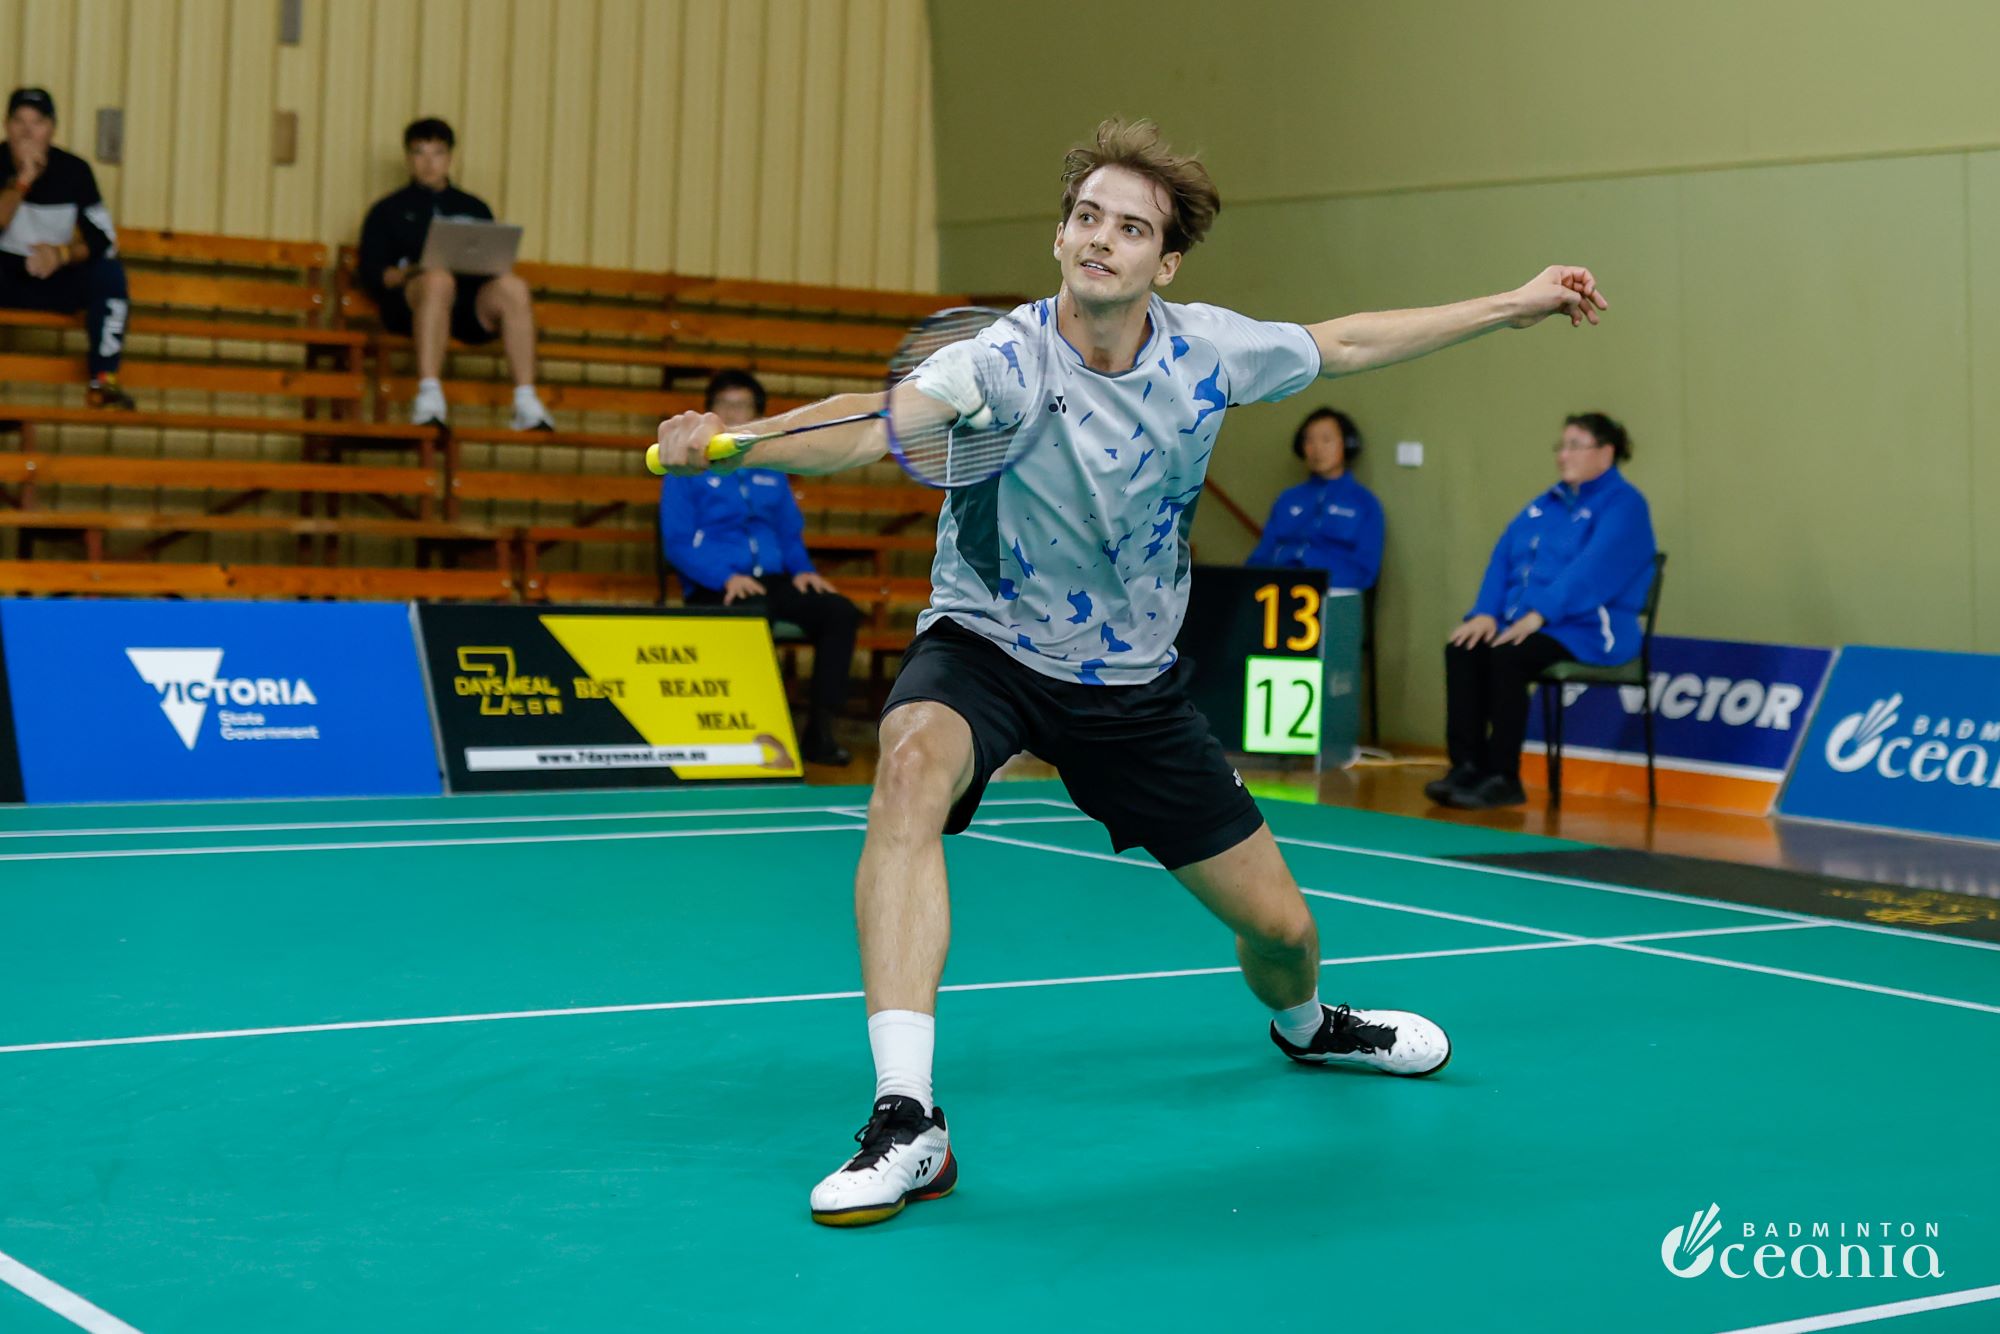 Intense Matches and Surprising Results SEMI FINALS at VICTOR Oceania